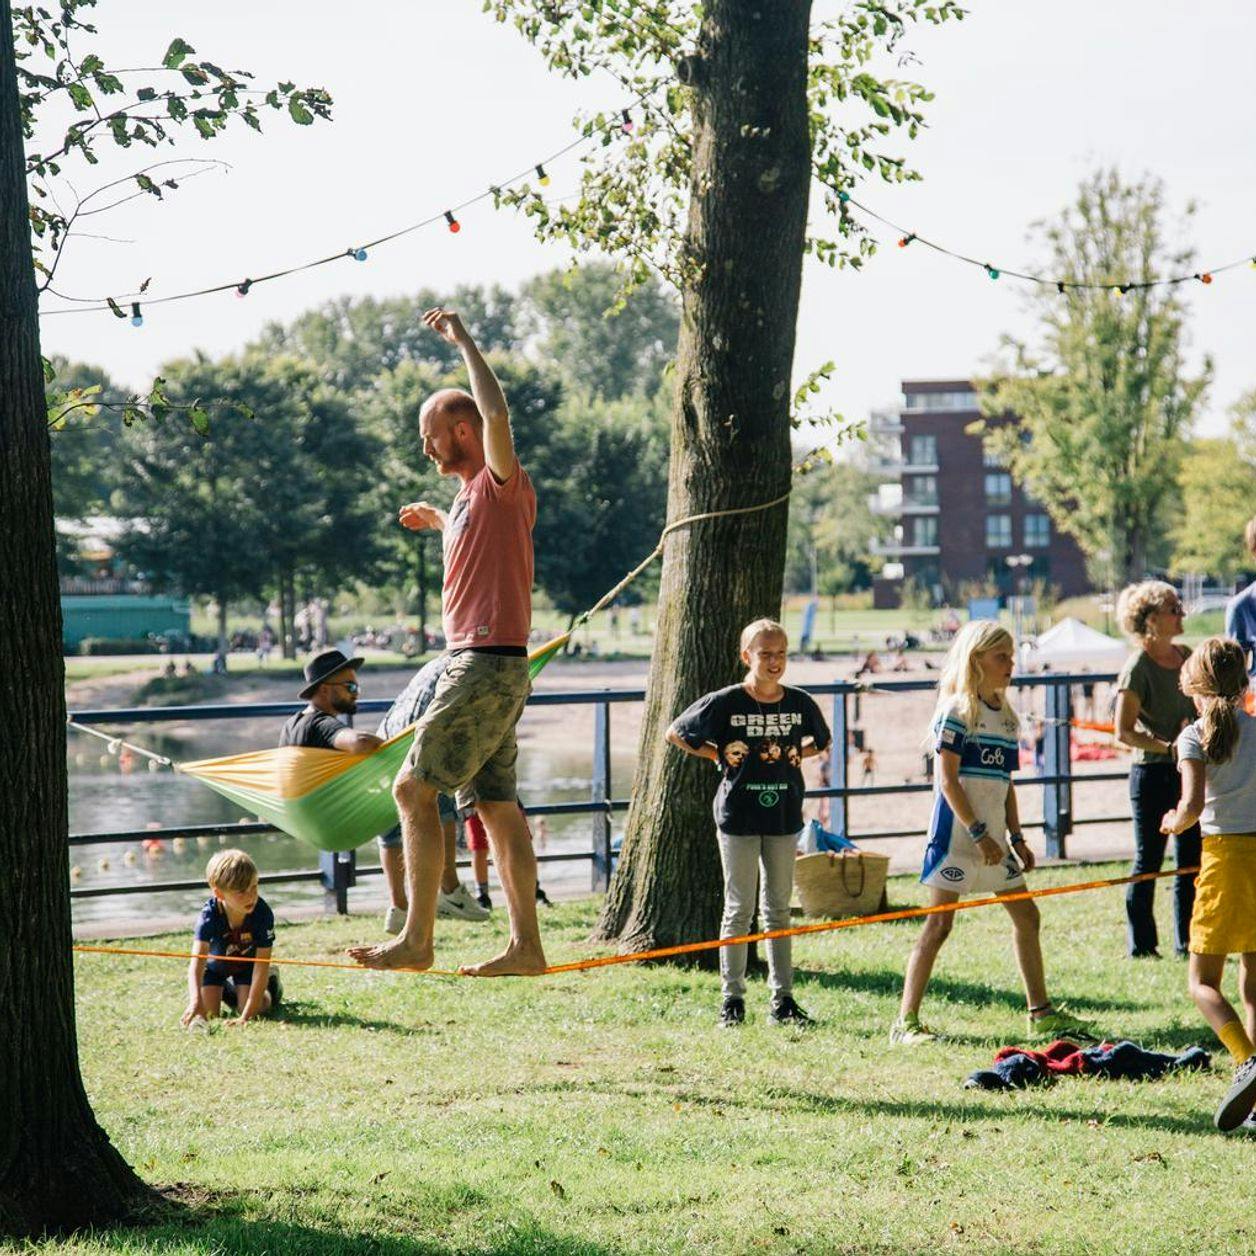 Kids playing at West Beach, Sloterplas during 24H Nieuw-West.